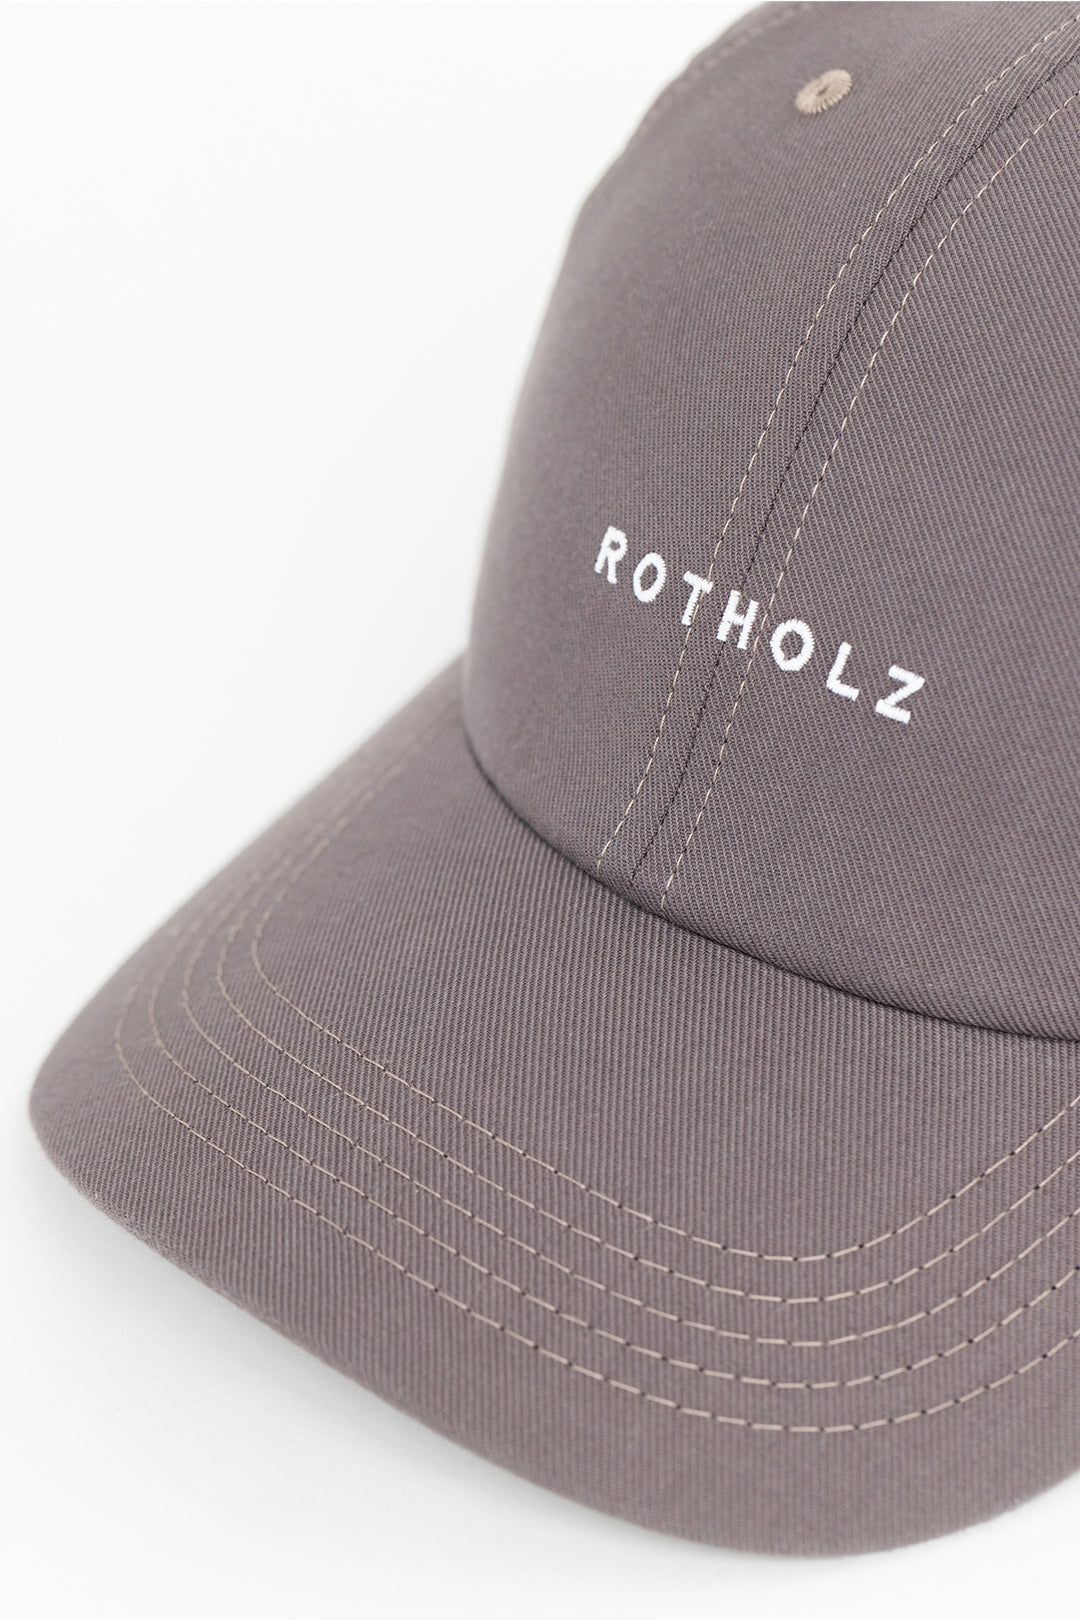 Gray Cap Dad made from 100% organic cotton from Rotholz